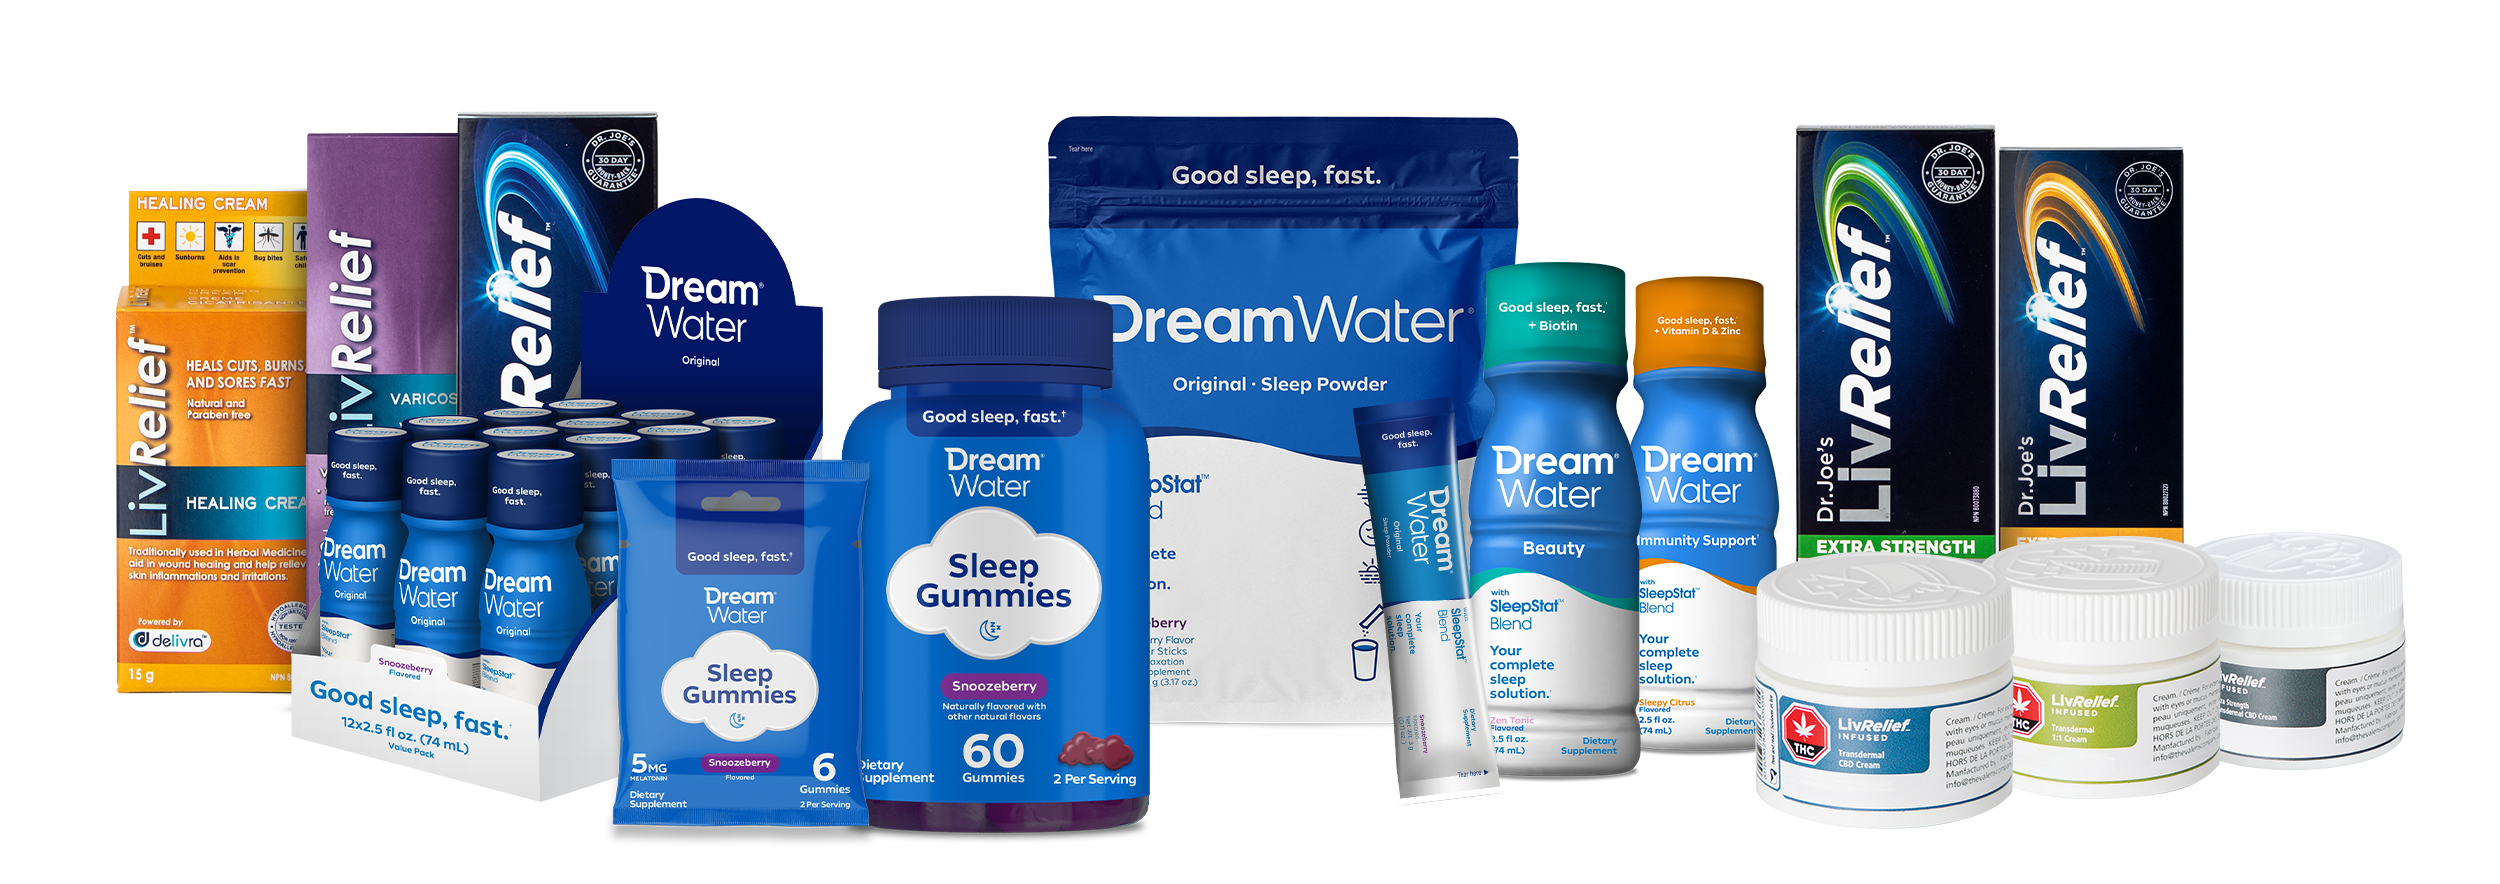 Dream Water Products